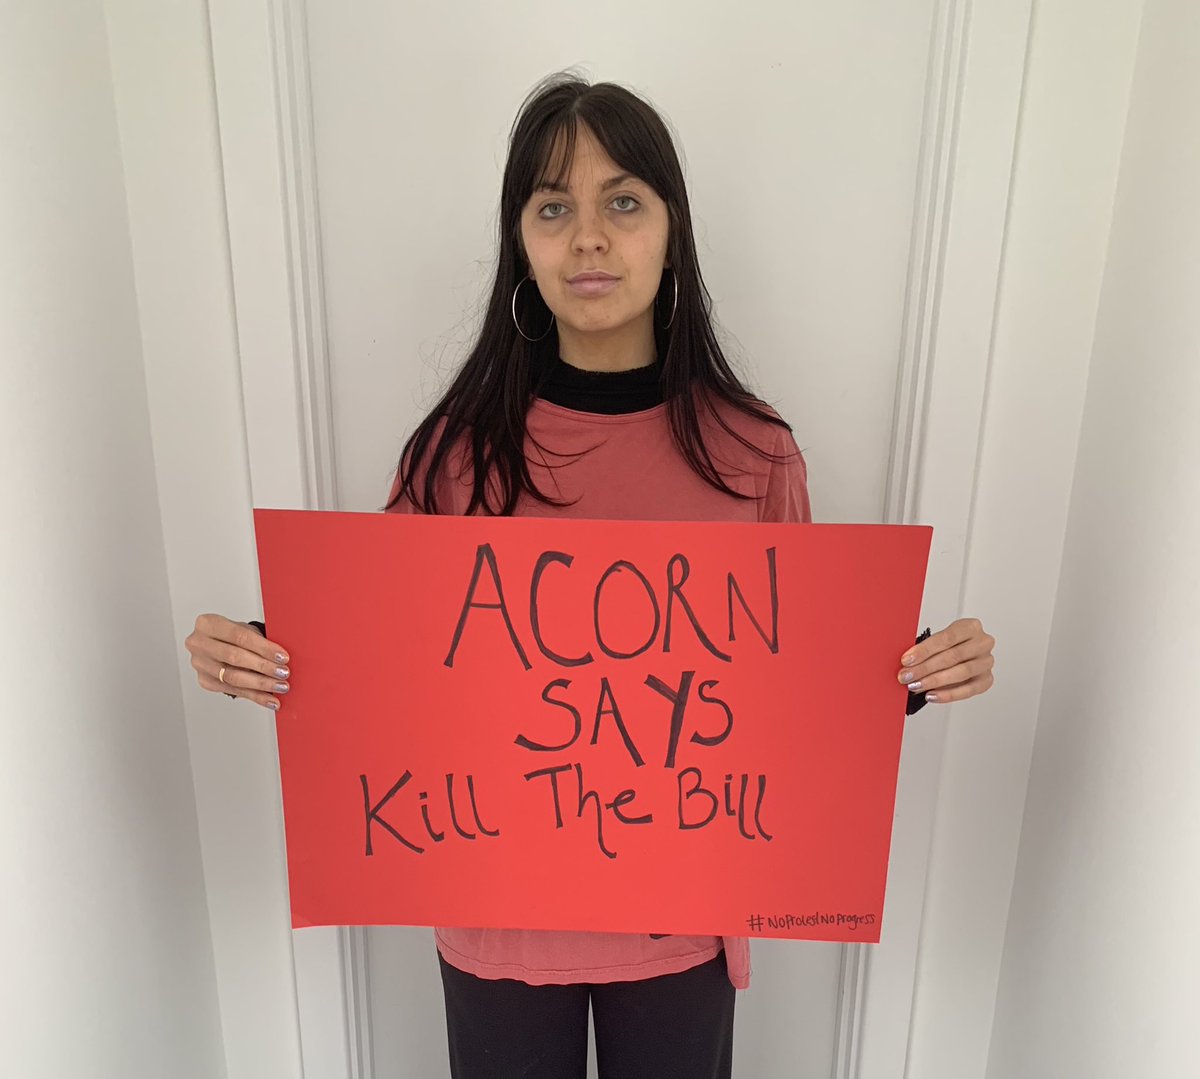 Today we’re taking action against the Police, Crime, Sentencing & Courts Bill.It's a threat to our right to protest & will protect the rich & powerful from ordinary people demanding change.  @PritiPatel &  @BorisJohnson -  #KillTheBill  #NoProtestNoProgress Join in, details below